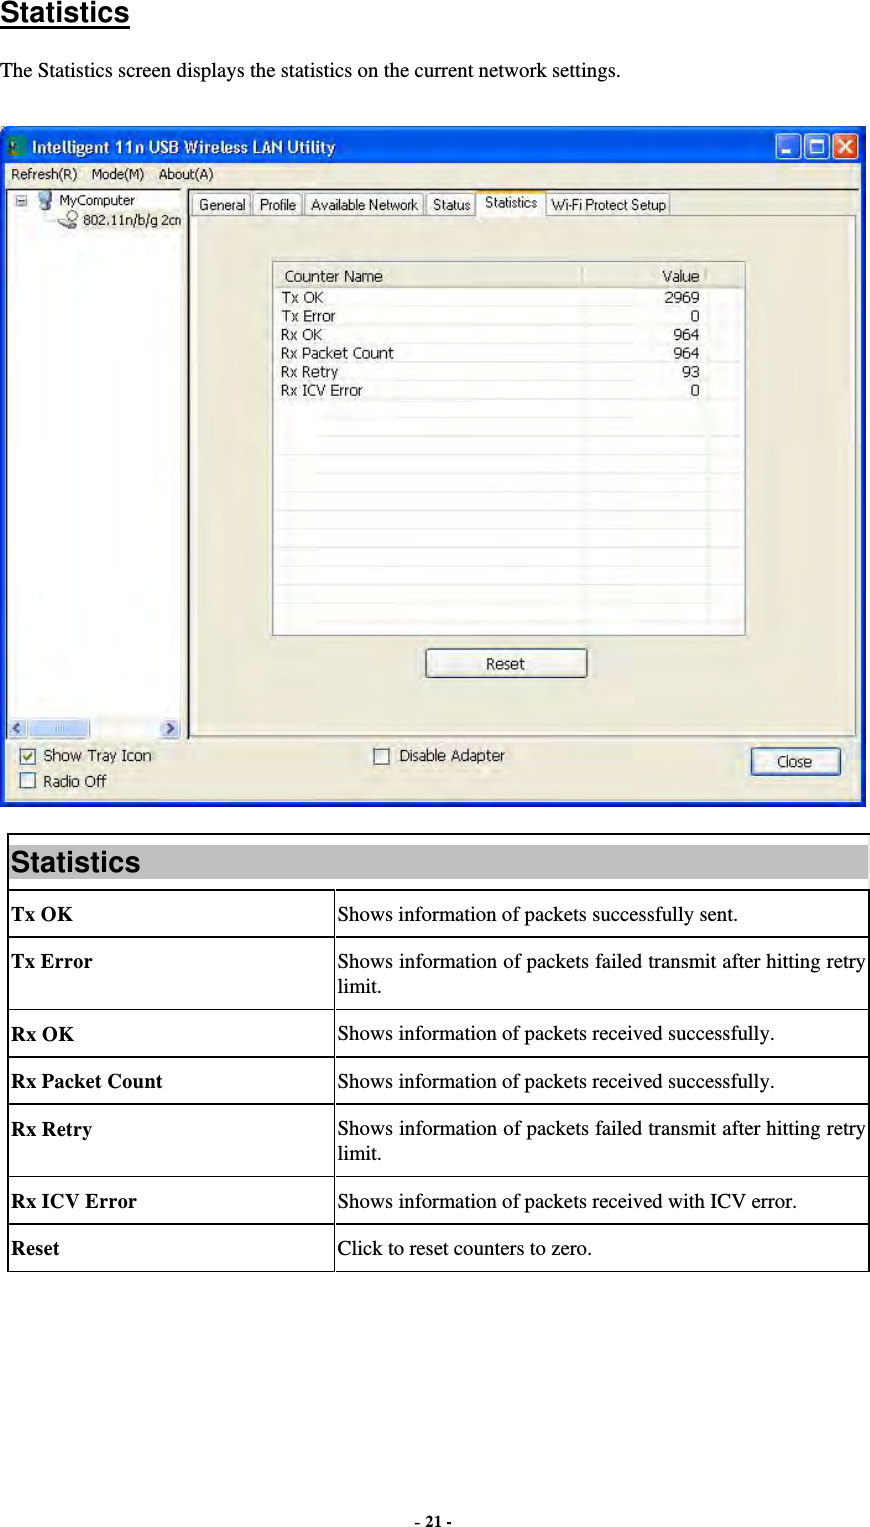  - 21 -  Statistics The Statistics screen displays the statistics on the current network settings.  Statistics Tx OK  Shows information of packets successfully sent. Tx Error  Shows information of packets failed transmit after hitting retry limit. Rx OK  Shows information of packets received successfully. Rx Packet Count  Shows information of packets received successfully. Rx Retry  Shows information of packets failed transmit after hitting retry limit. Rx ICV Error  Shows information of packets received with ICV error. Reset  Click to reset counters to zero.   